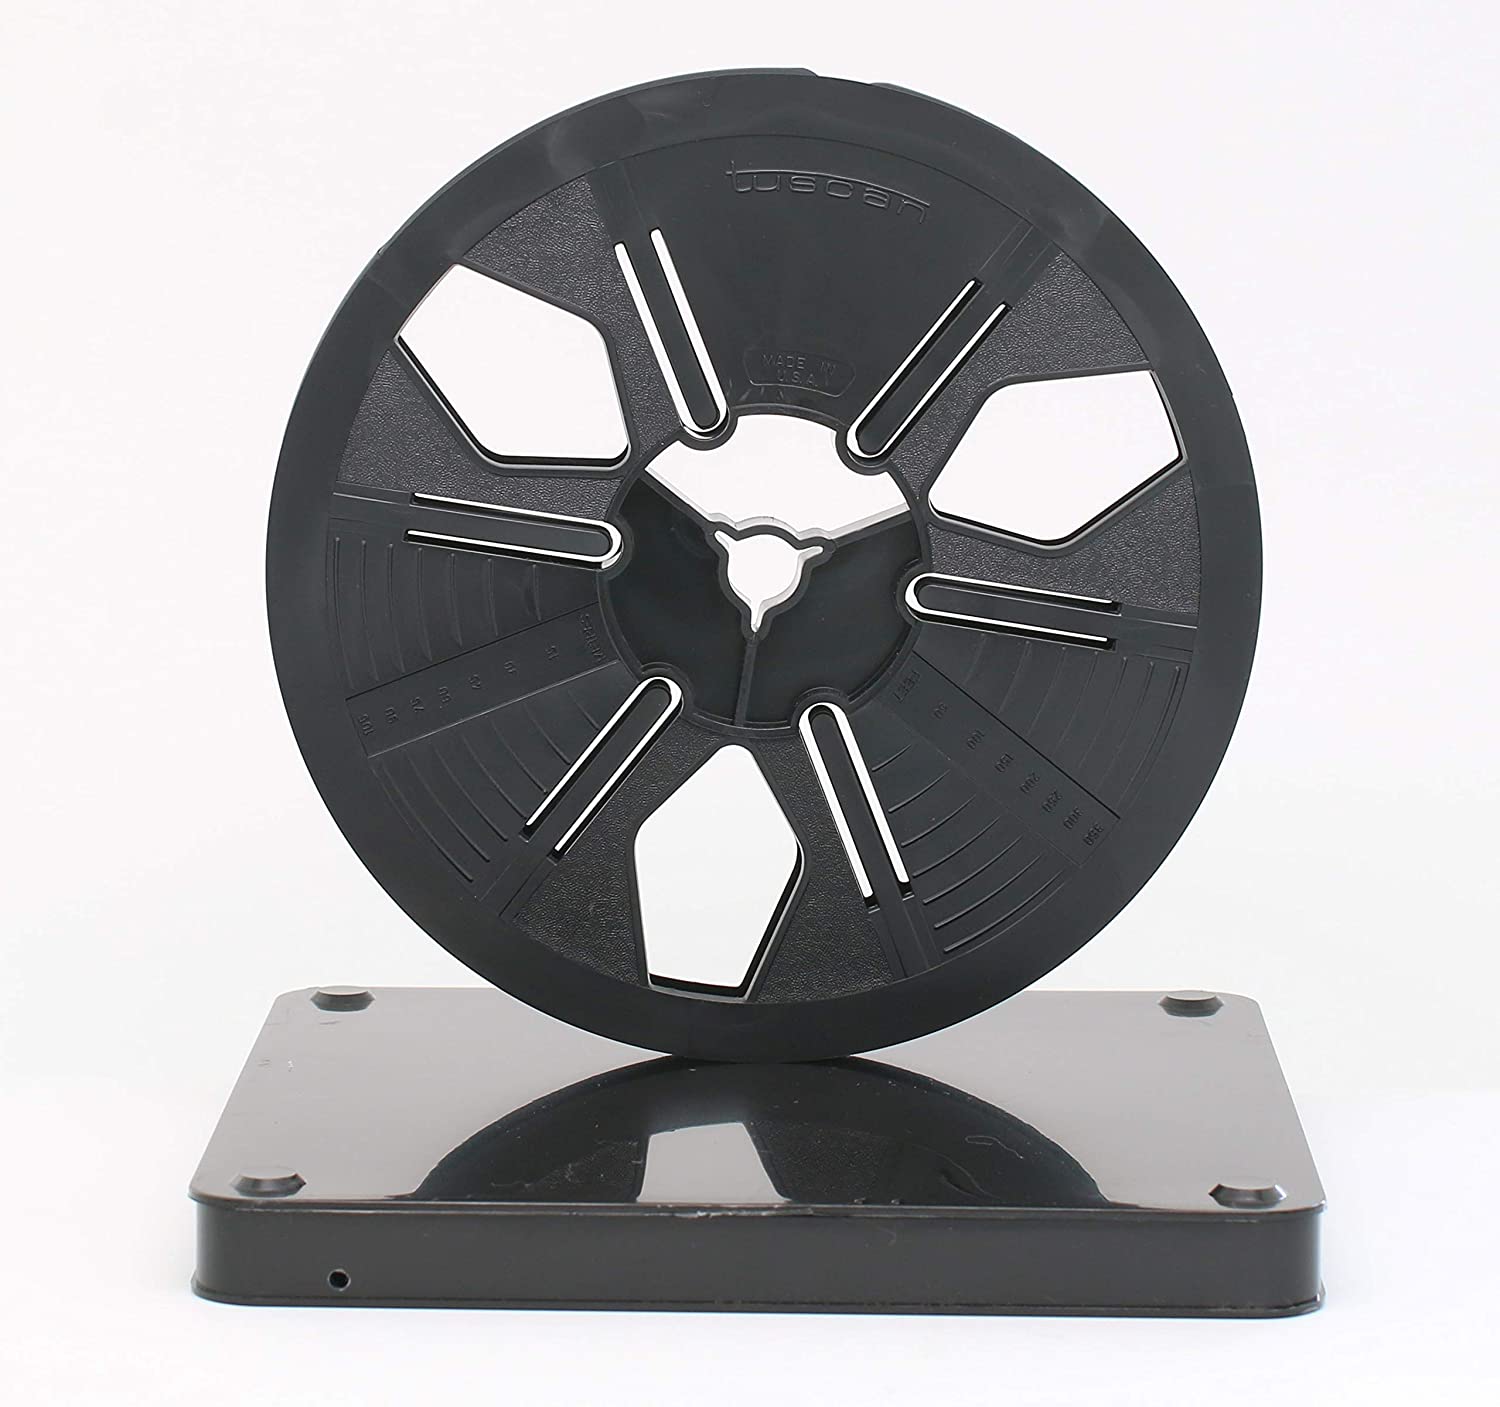 Super 8mm 400ft Plastic Reel and Can – Liaison of Independent Filmmakers of  Toronto